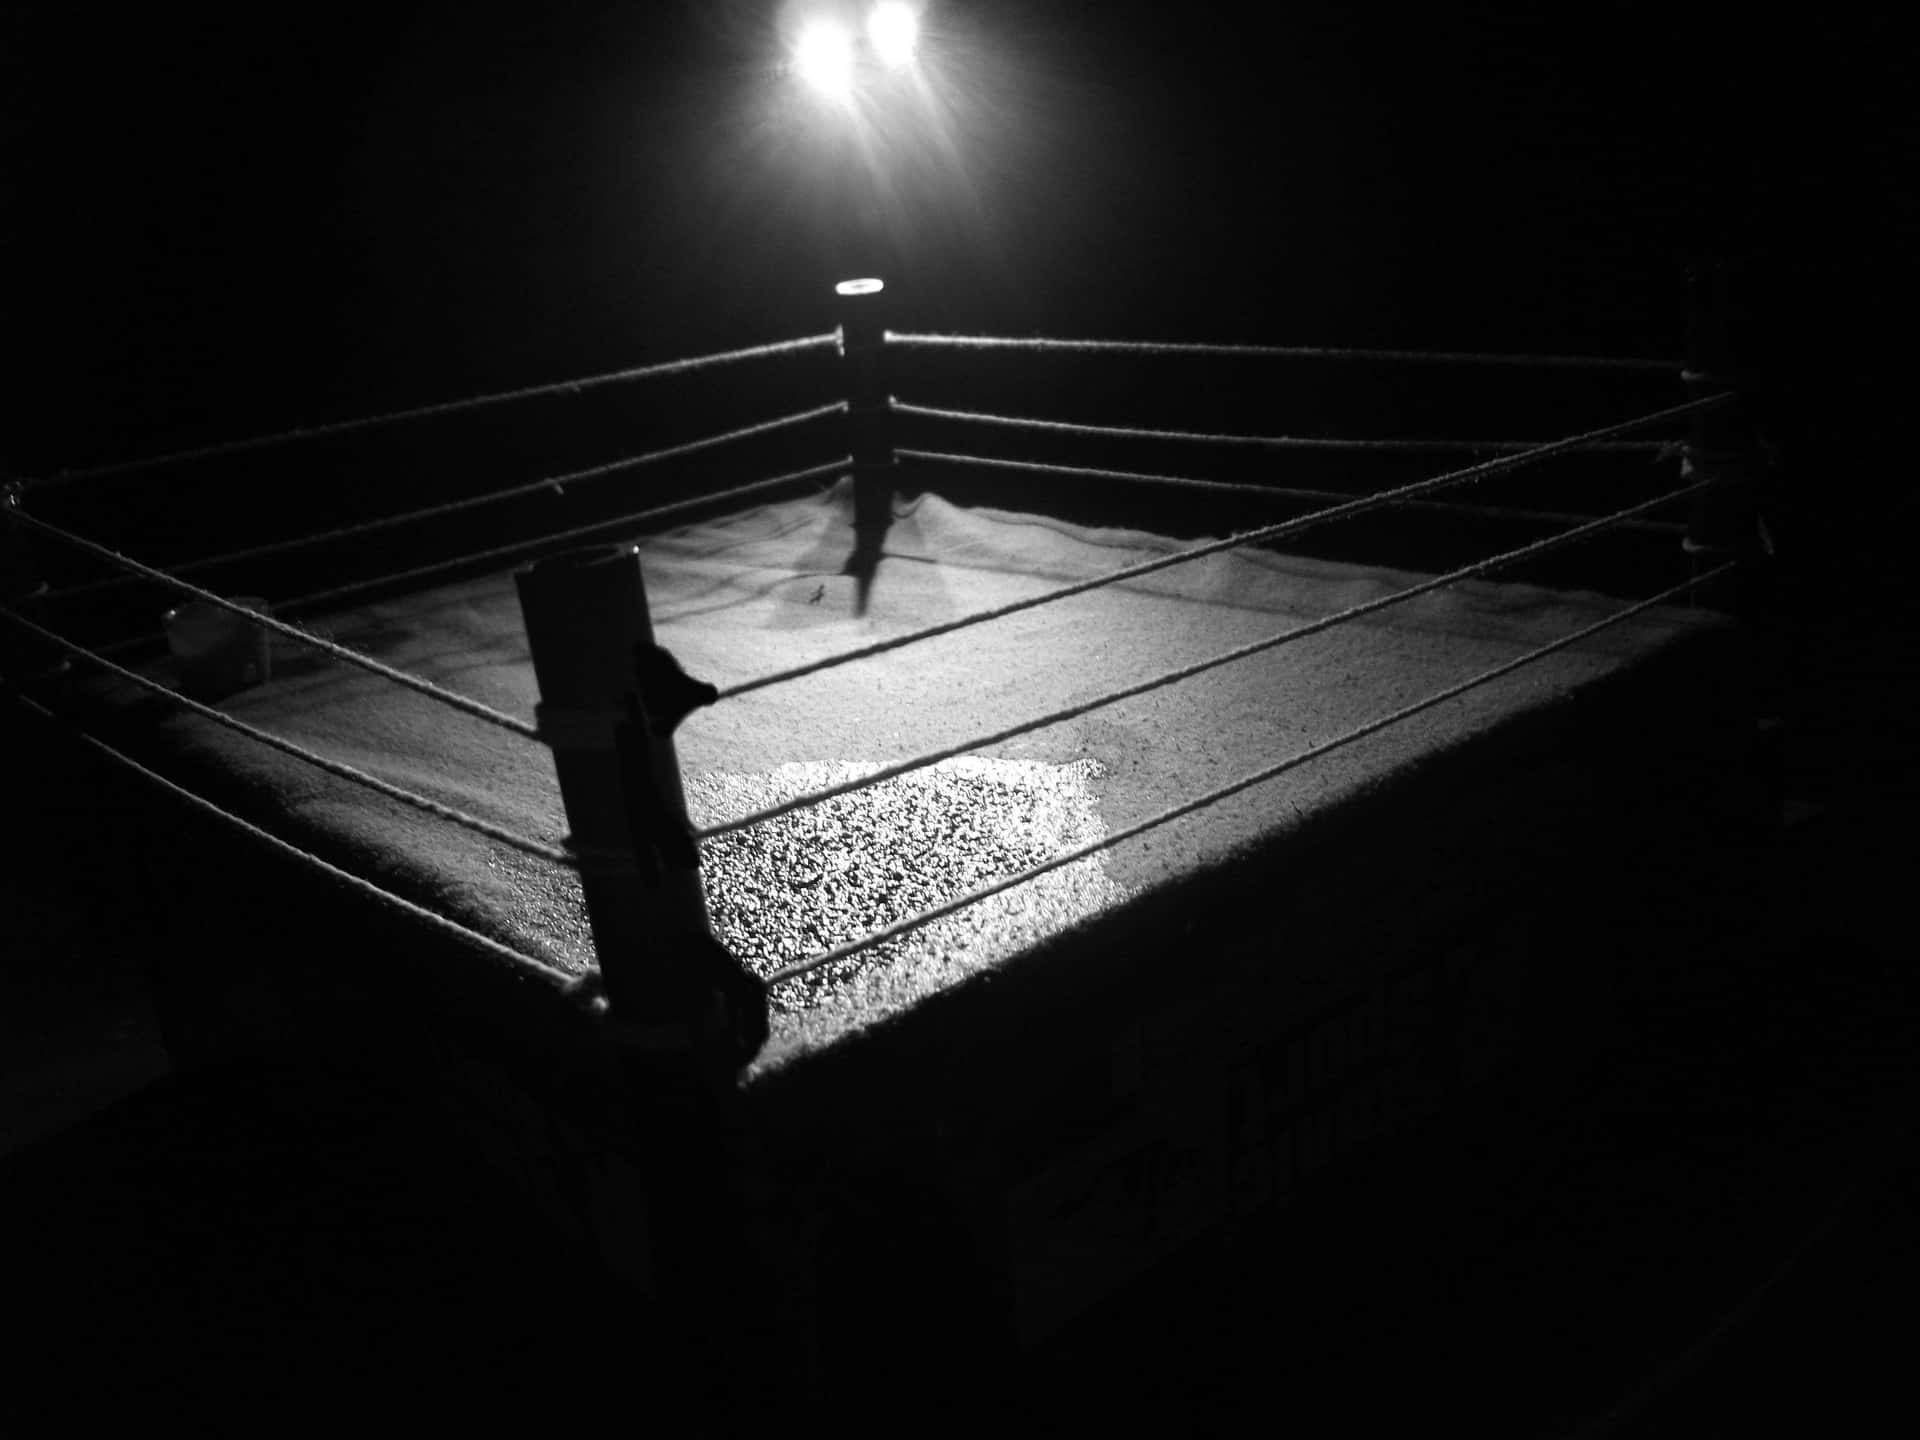 Get Ready Wrestling Fans - Prepare To Get Locked In the Ring!